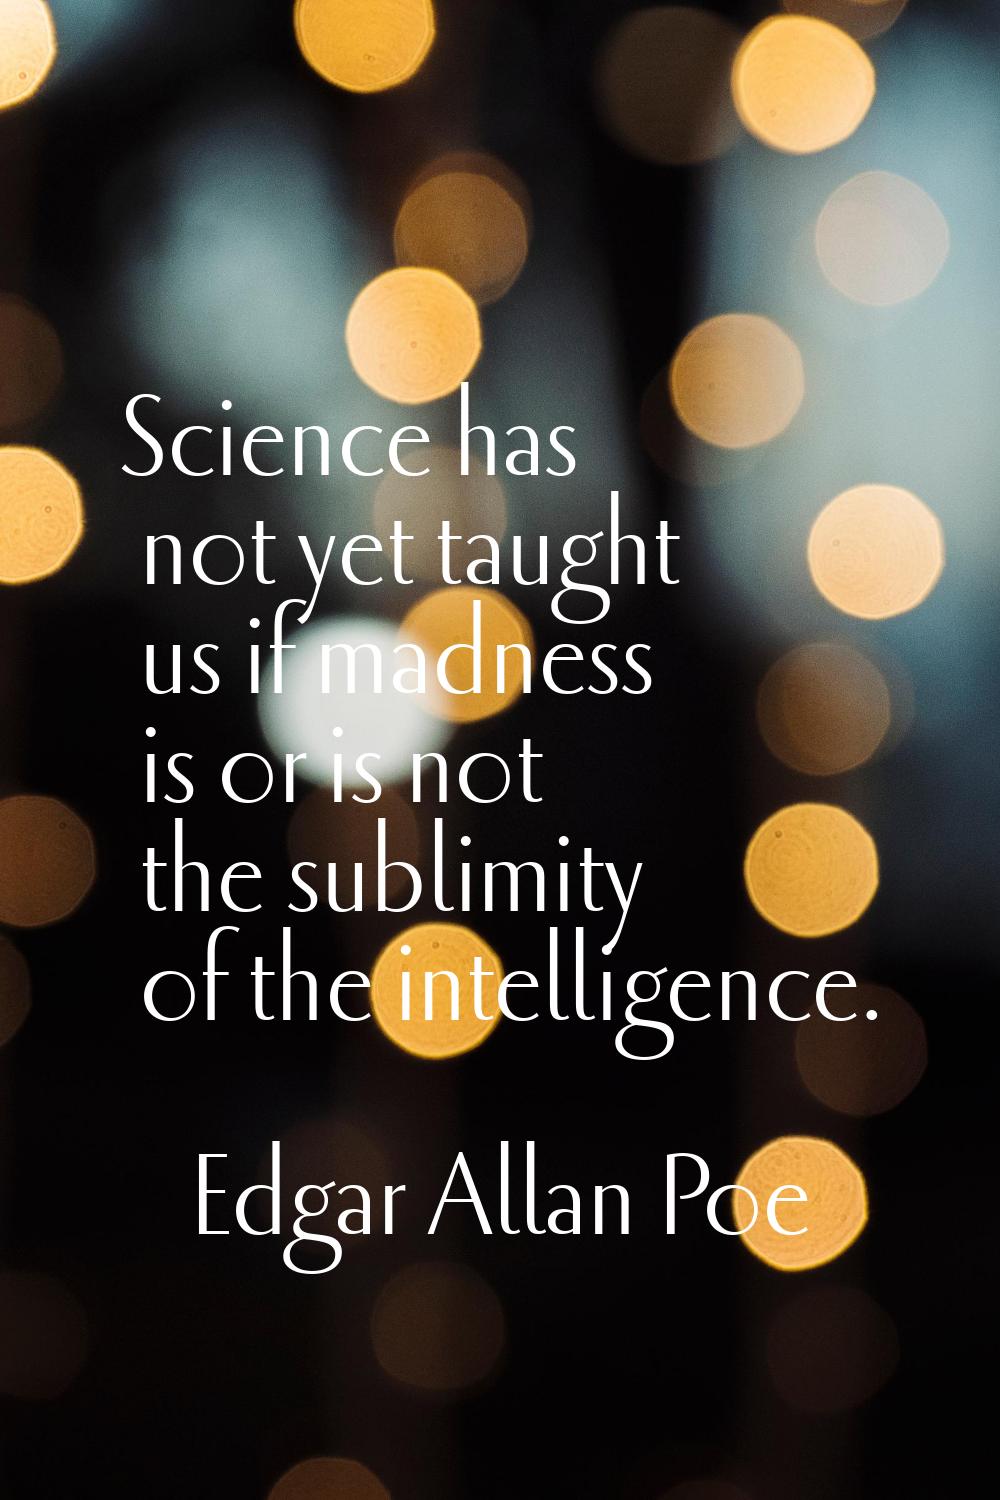 Science has not yet taught us if madness is or is not the sublimity of the intelligence.